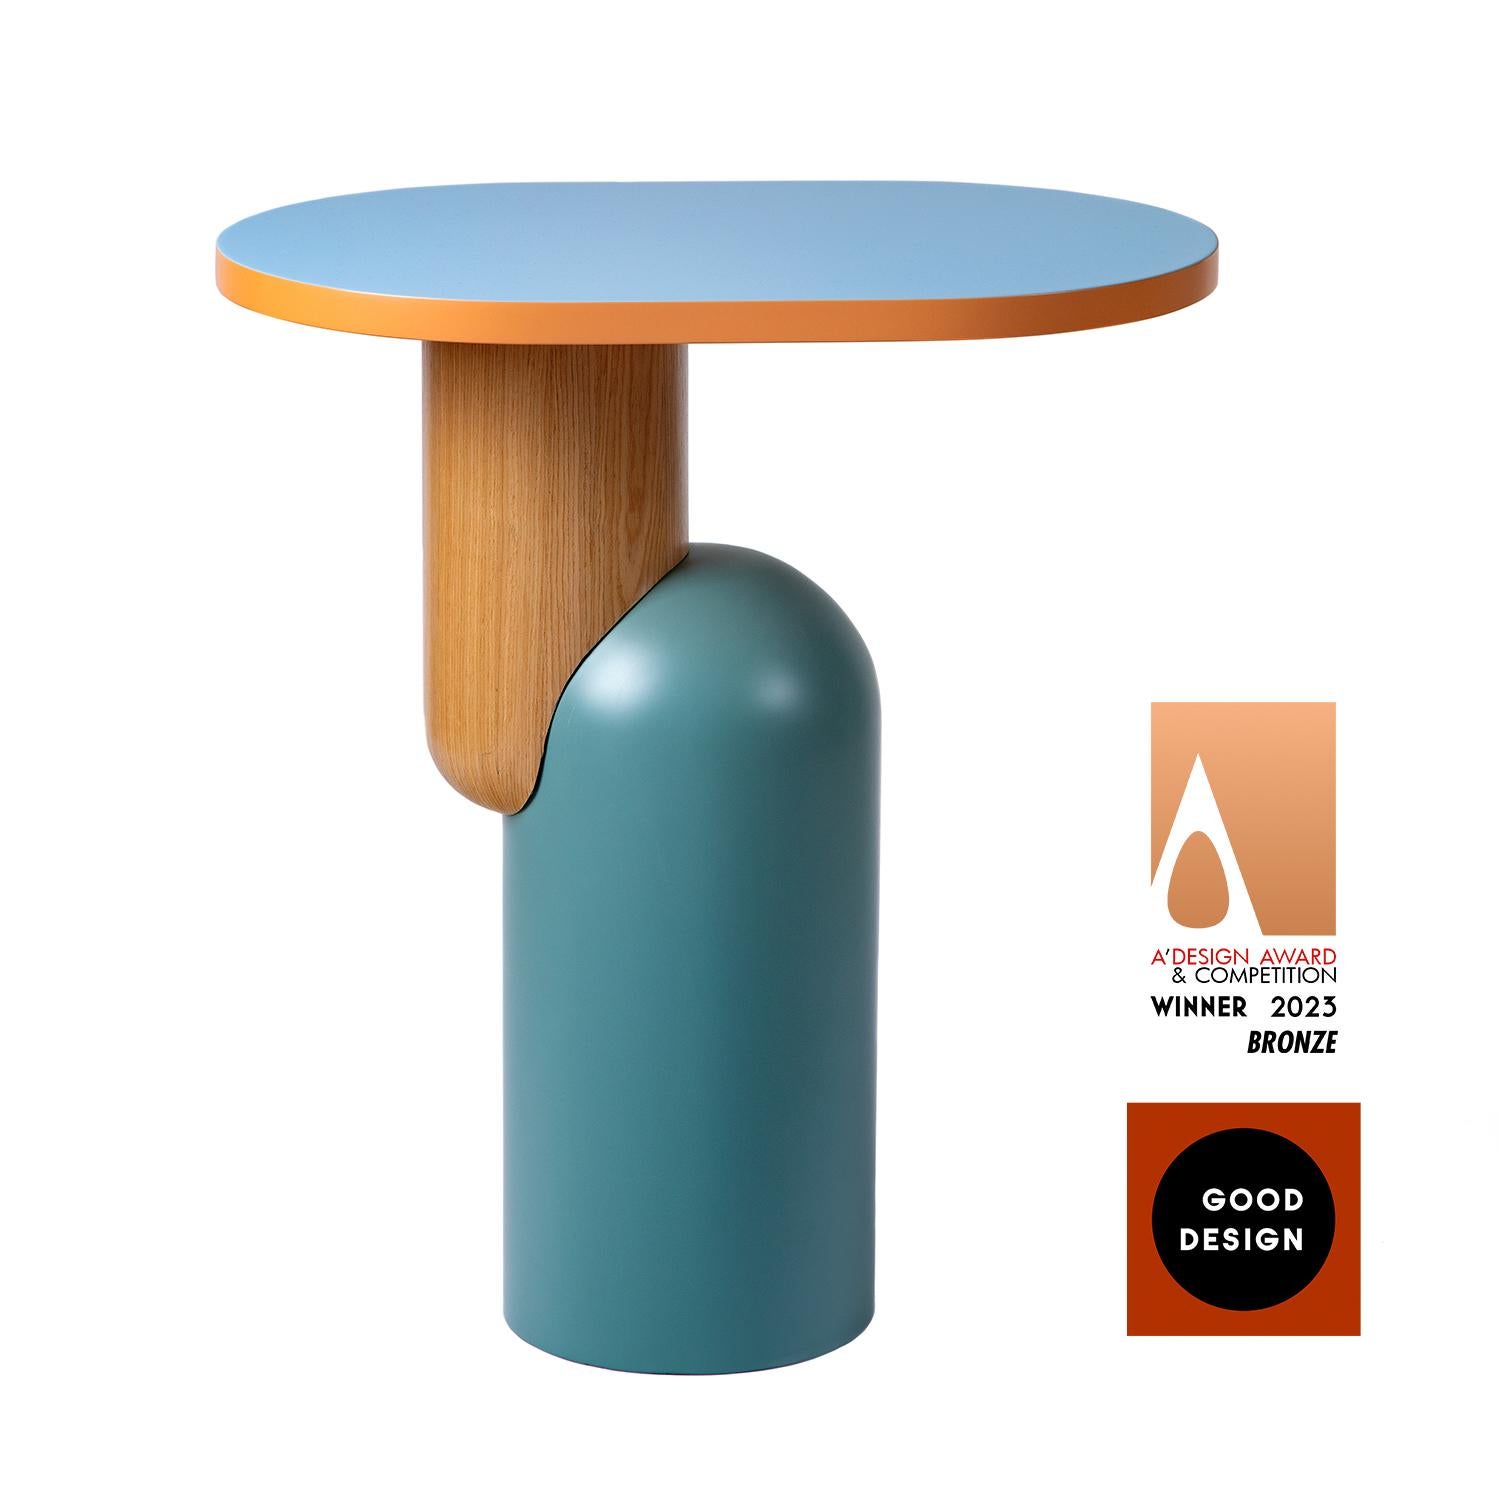 Good Design Award  Furniture 2022
A' Design Award  Bronze - Furniture 2023
This piece is a tribute of the work Abaporu (1928), by Tarsila do Amaral, who played a key role in the emergence of Brazil’s modernism movement, with her unmistakable